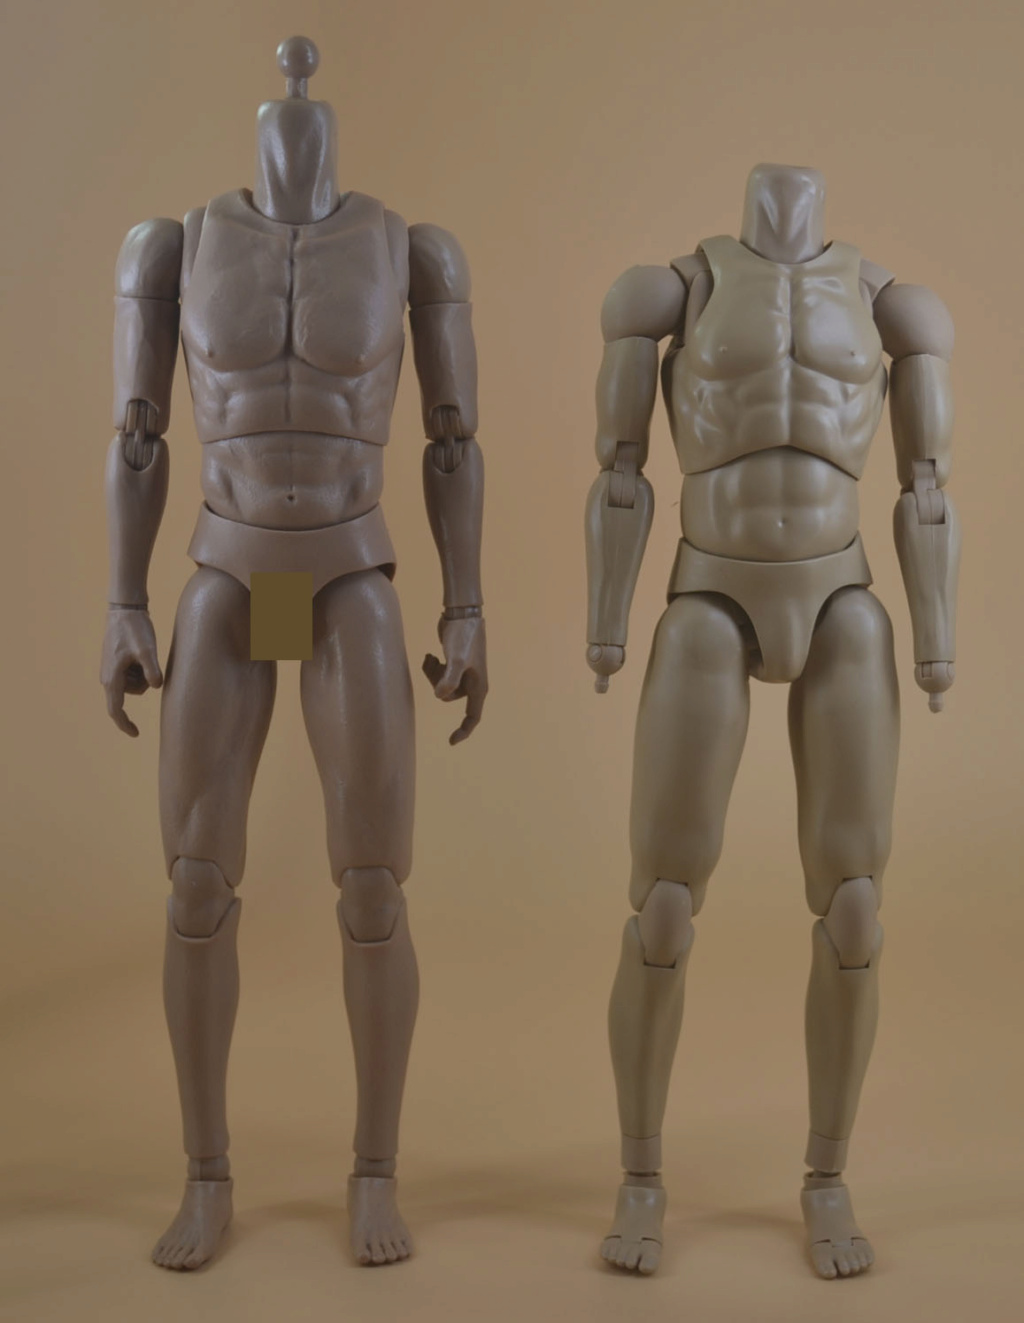 accessory - NEW PRODUCT: COOMODEL: 1/6 MB001 standard male body, MB002 tall male body, MB003 muscle male body, MB004 tall muscle body _dsc3737